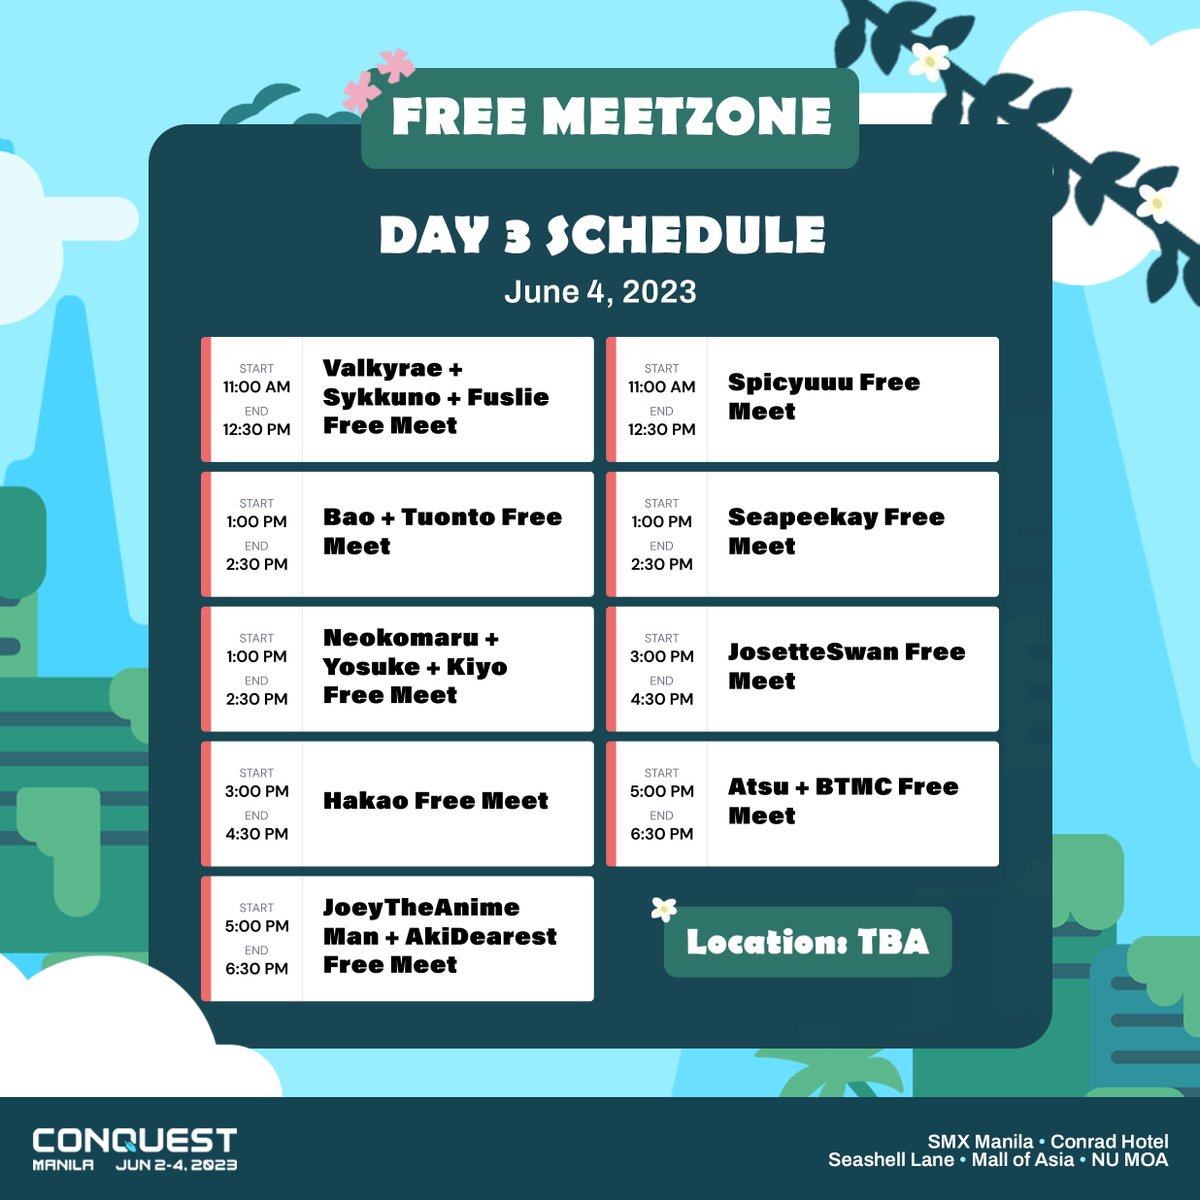 Here's how you can meet your favorite creators at #CONQuest2023 with our FREE MeetZone: bit.ly/CQ23MeetZone

3 ways to join:
📝 Apply for a Reserved Slot
✨ Get a Premium Pass
🎟️ Claim a Stub on Event Day at the Merch Booth 

#SeeYouIntheSkies ☁️